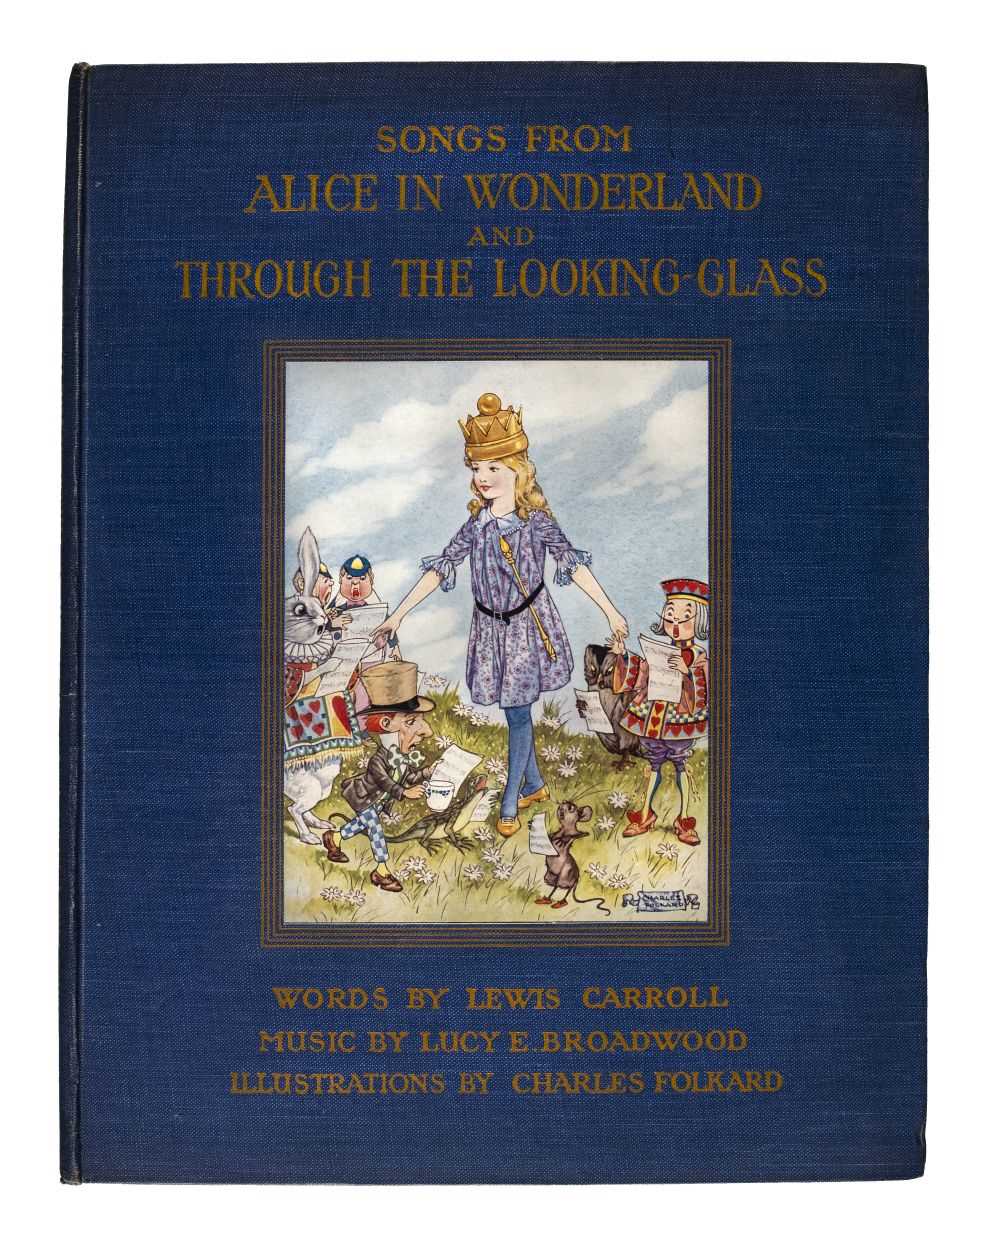 Lot 609 - Dodgson (Charles Lutwidge, 'Lewis Carroll'). Songs from Alice in Wonderland ..., 1921